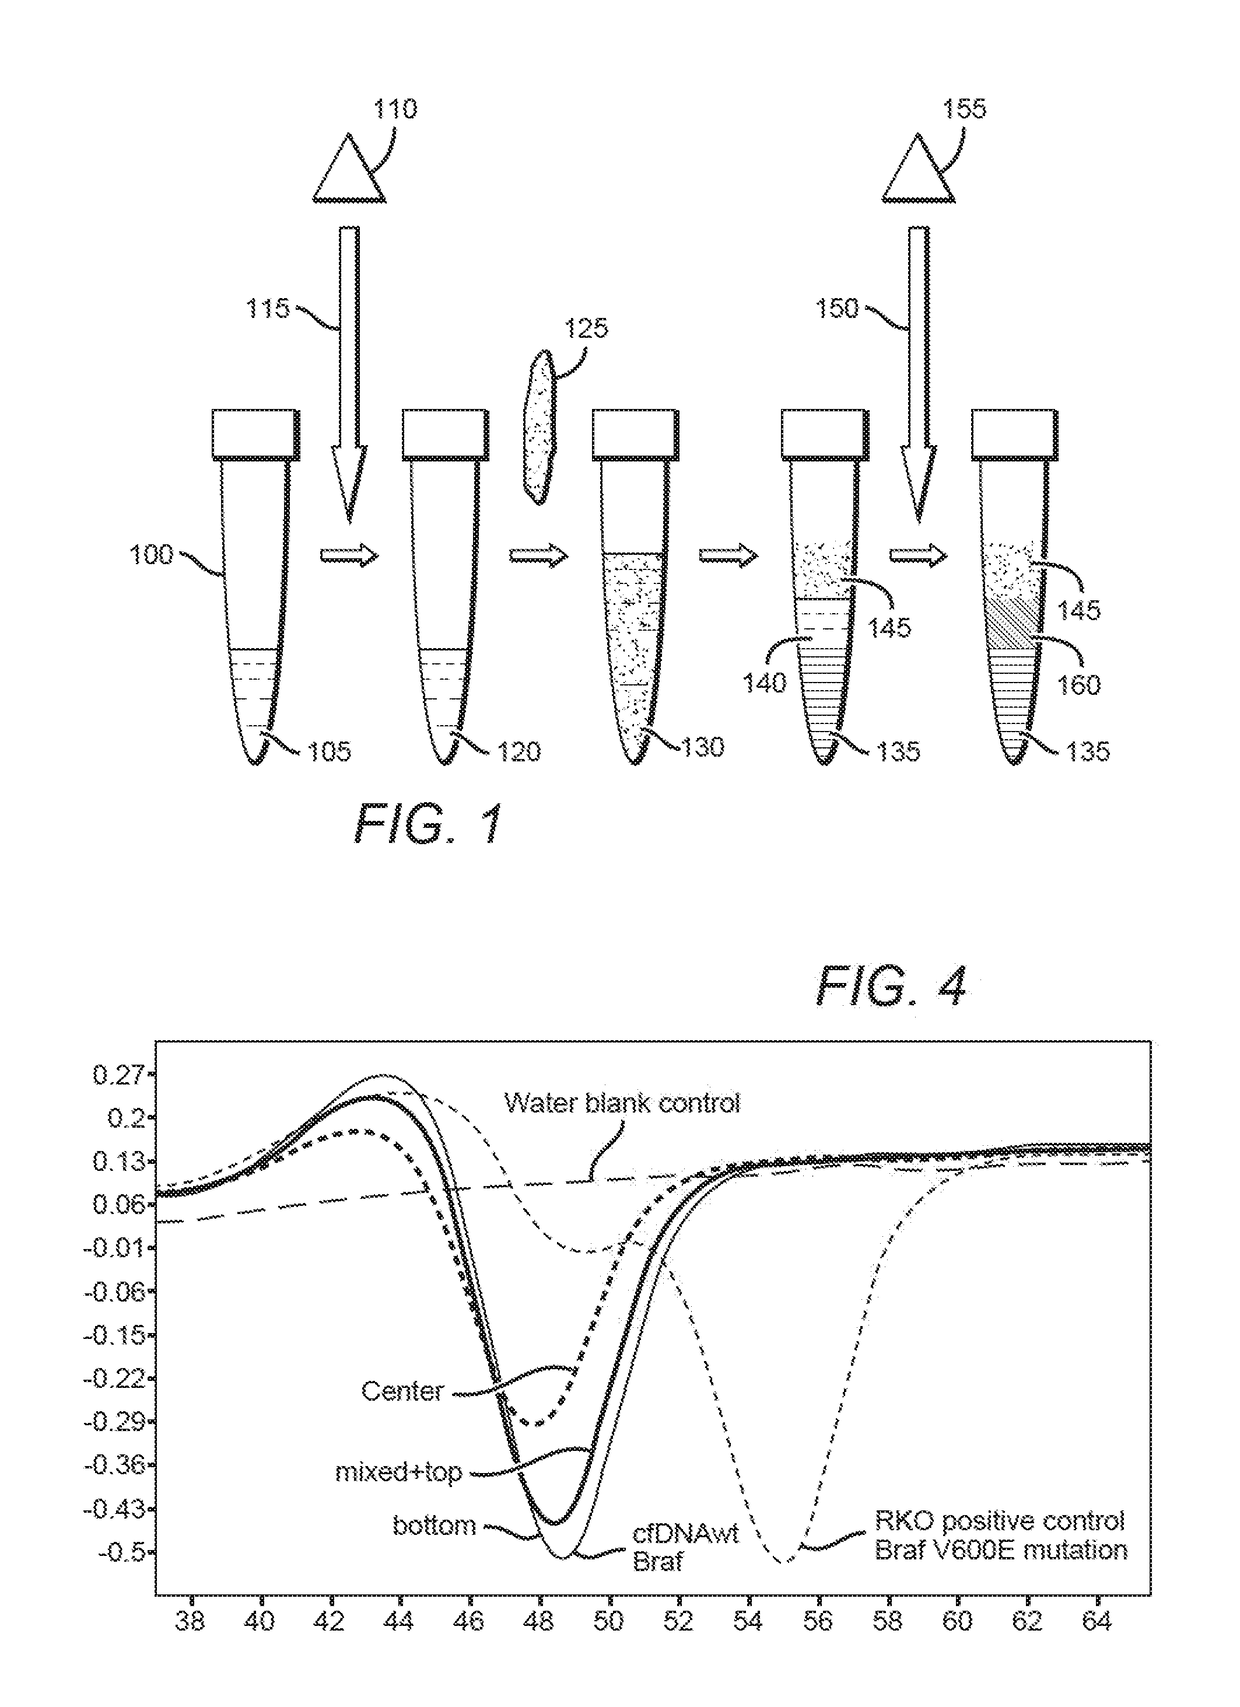 Platelet rich plasma and bone marrow aspirate cell separation and removal methods and devices